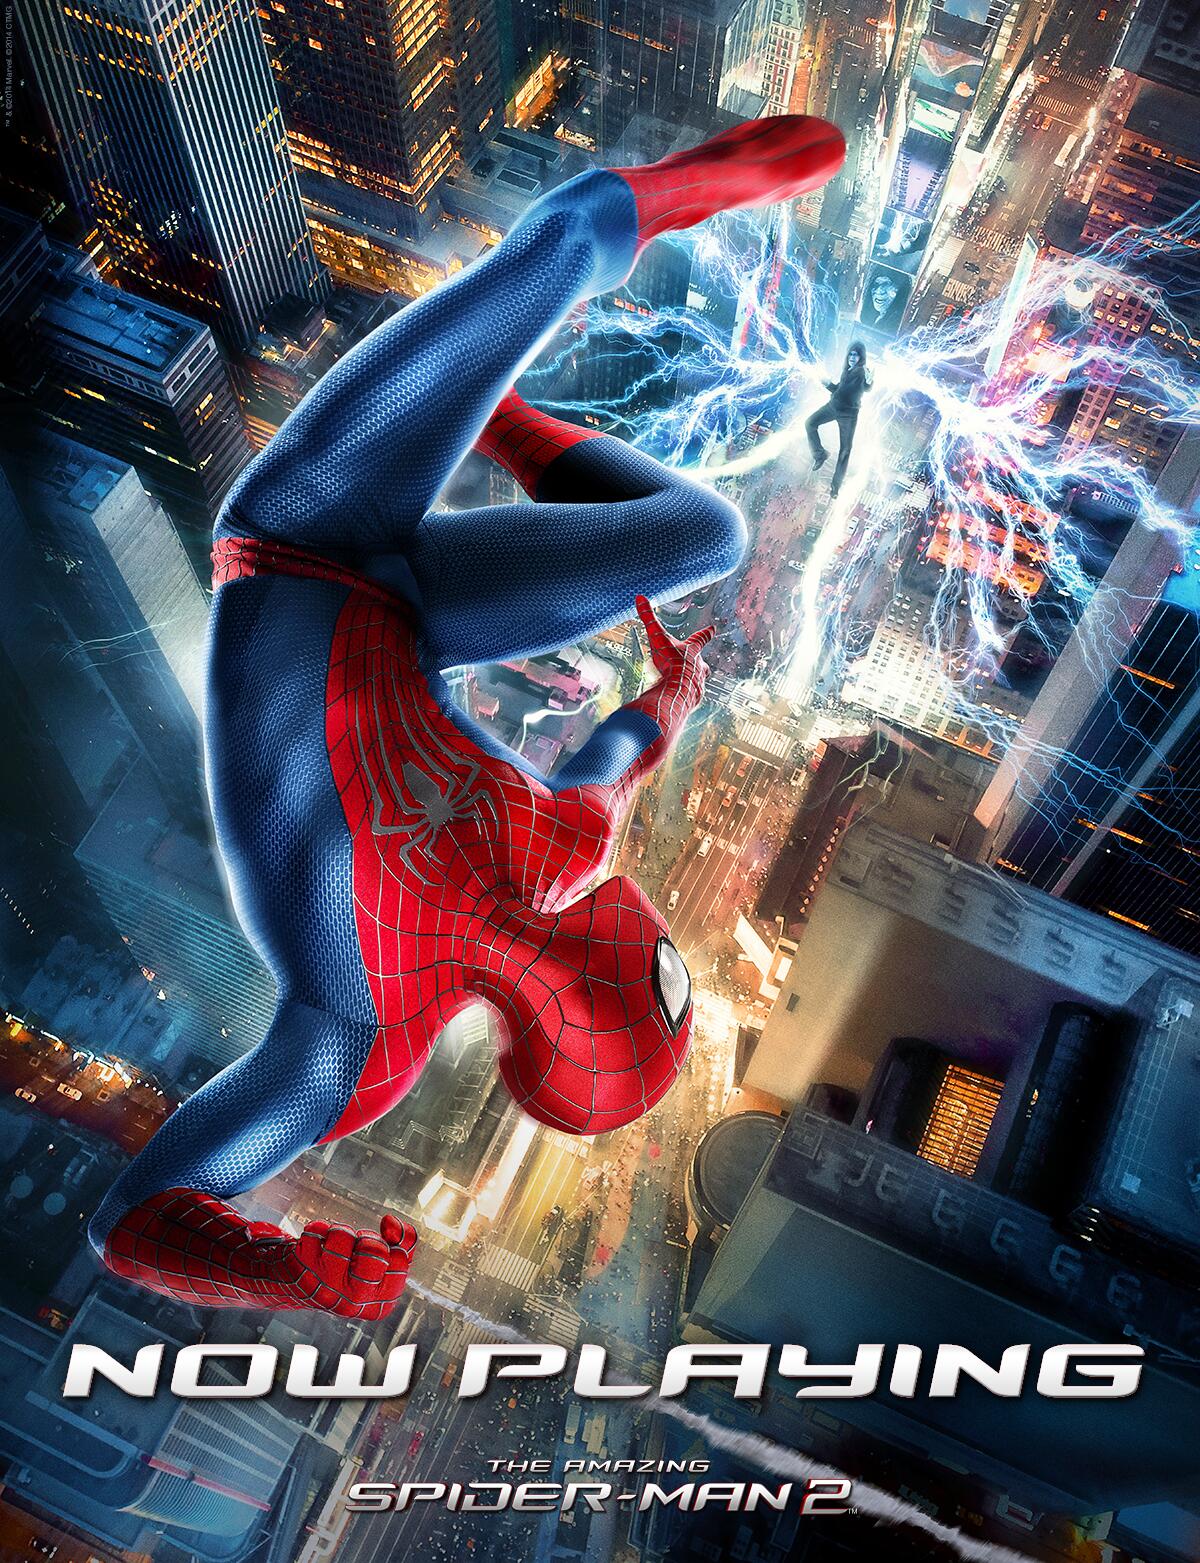 Spider Man No Way Home Prepare To Be Amazed Get Tickets Now For The Amazing Spiderman 2 In 3d And Imax 3d Http T Co Mkty4htpos Http T Co Jtaa7dgqyb